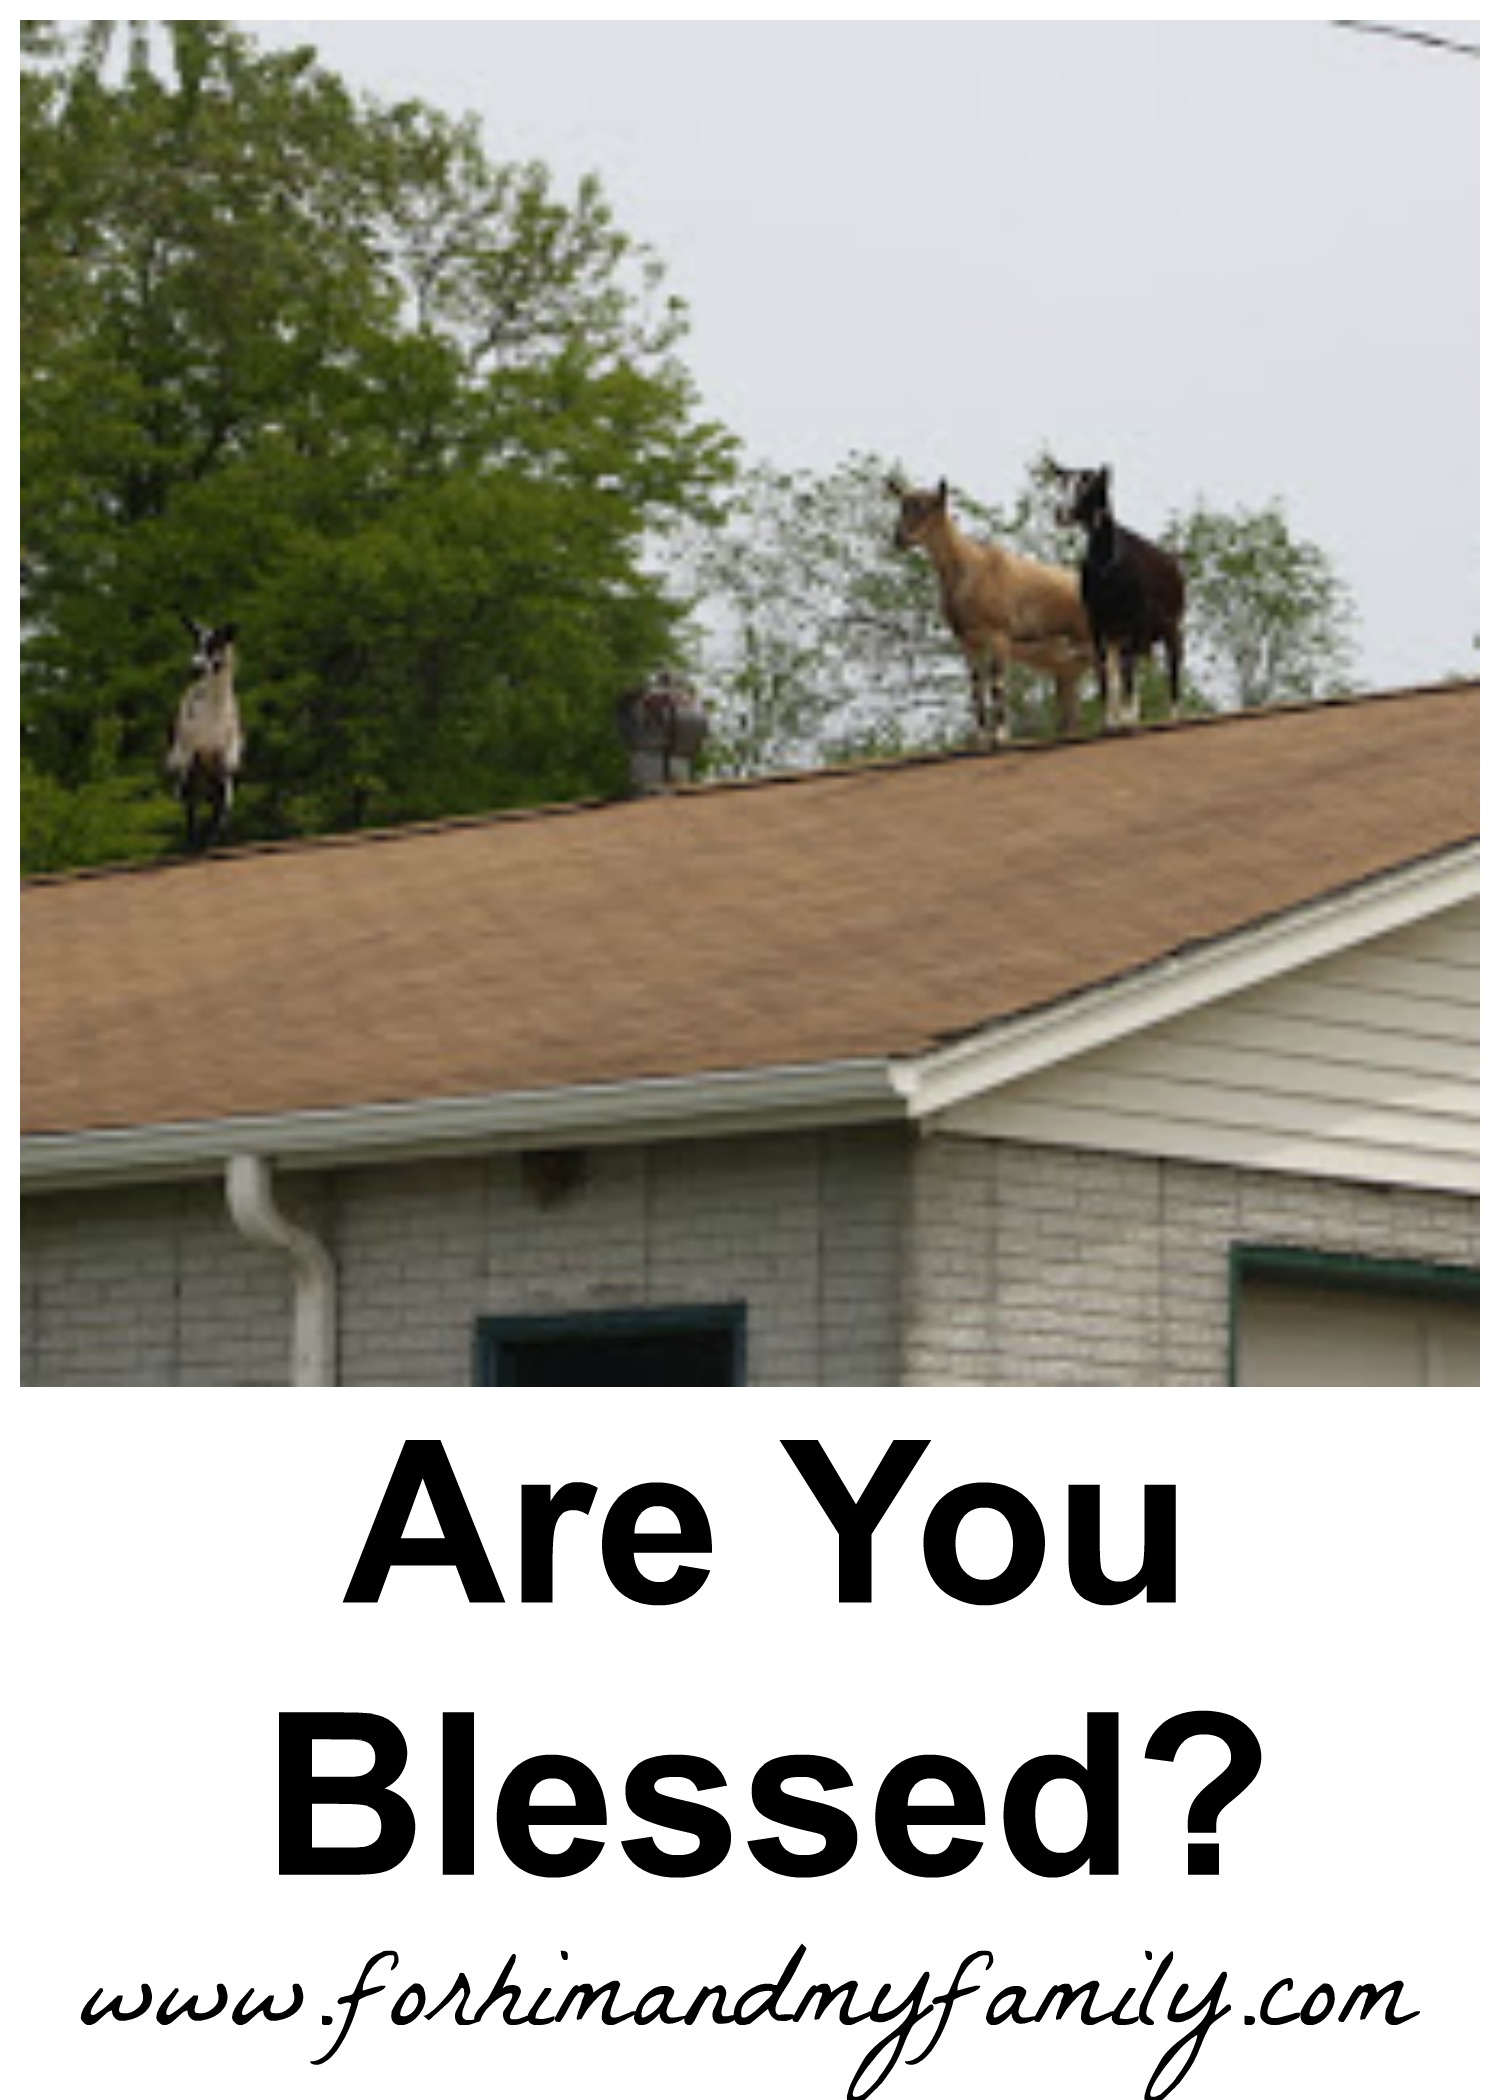 Are you blessed?